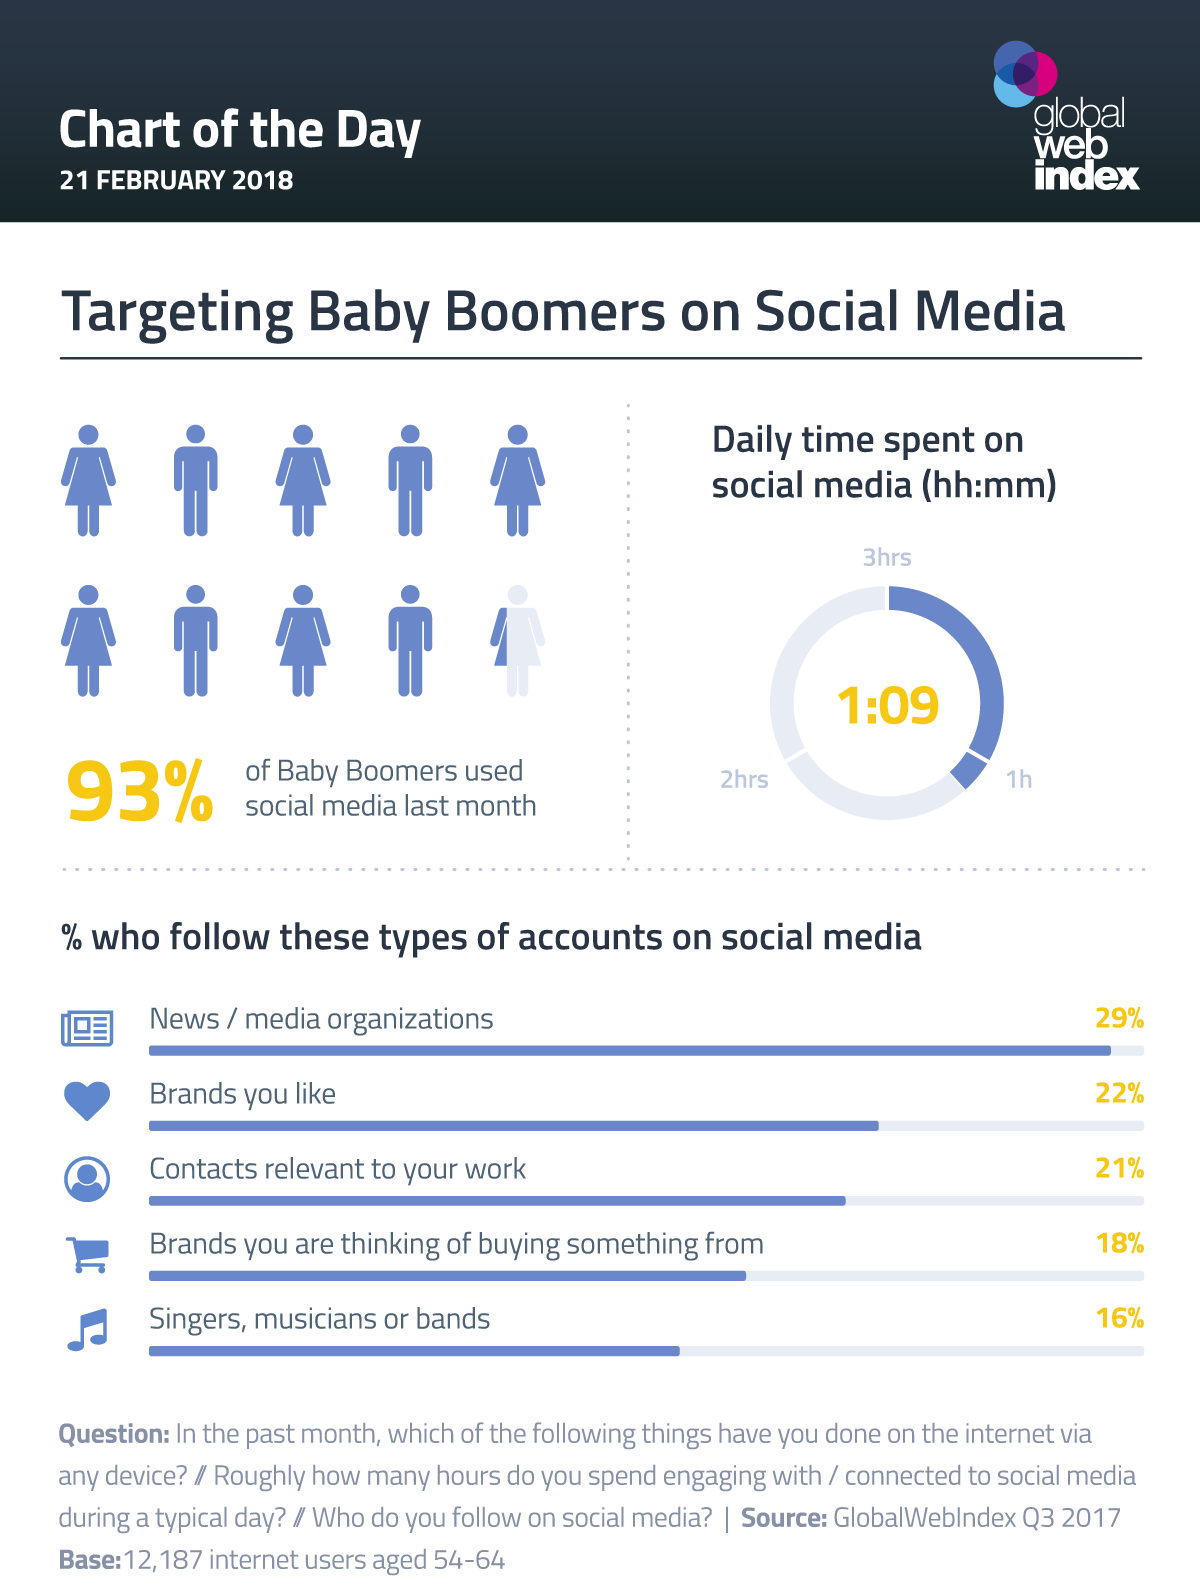 Targeting Baby Boomers on Social Media